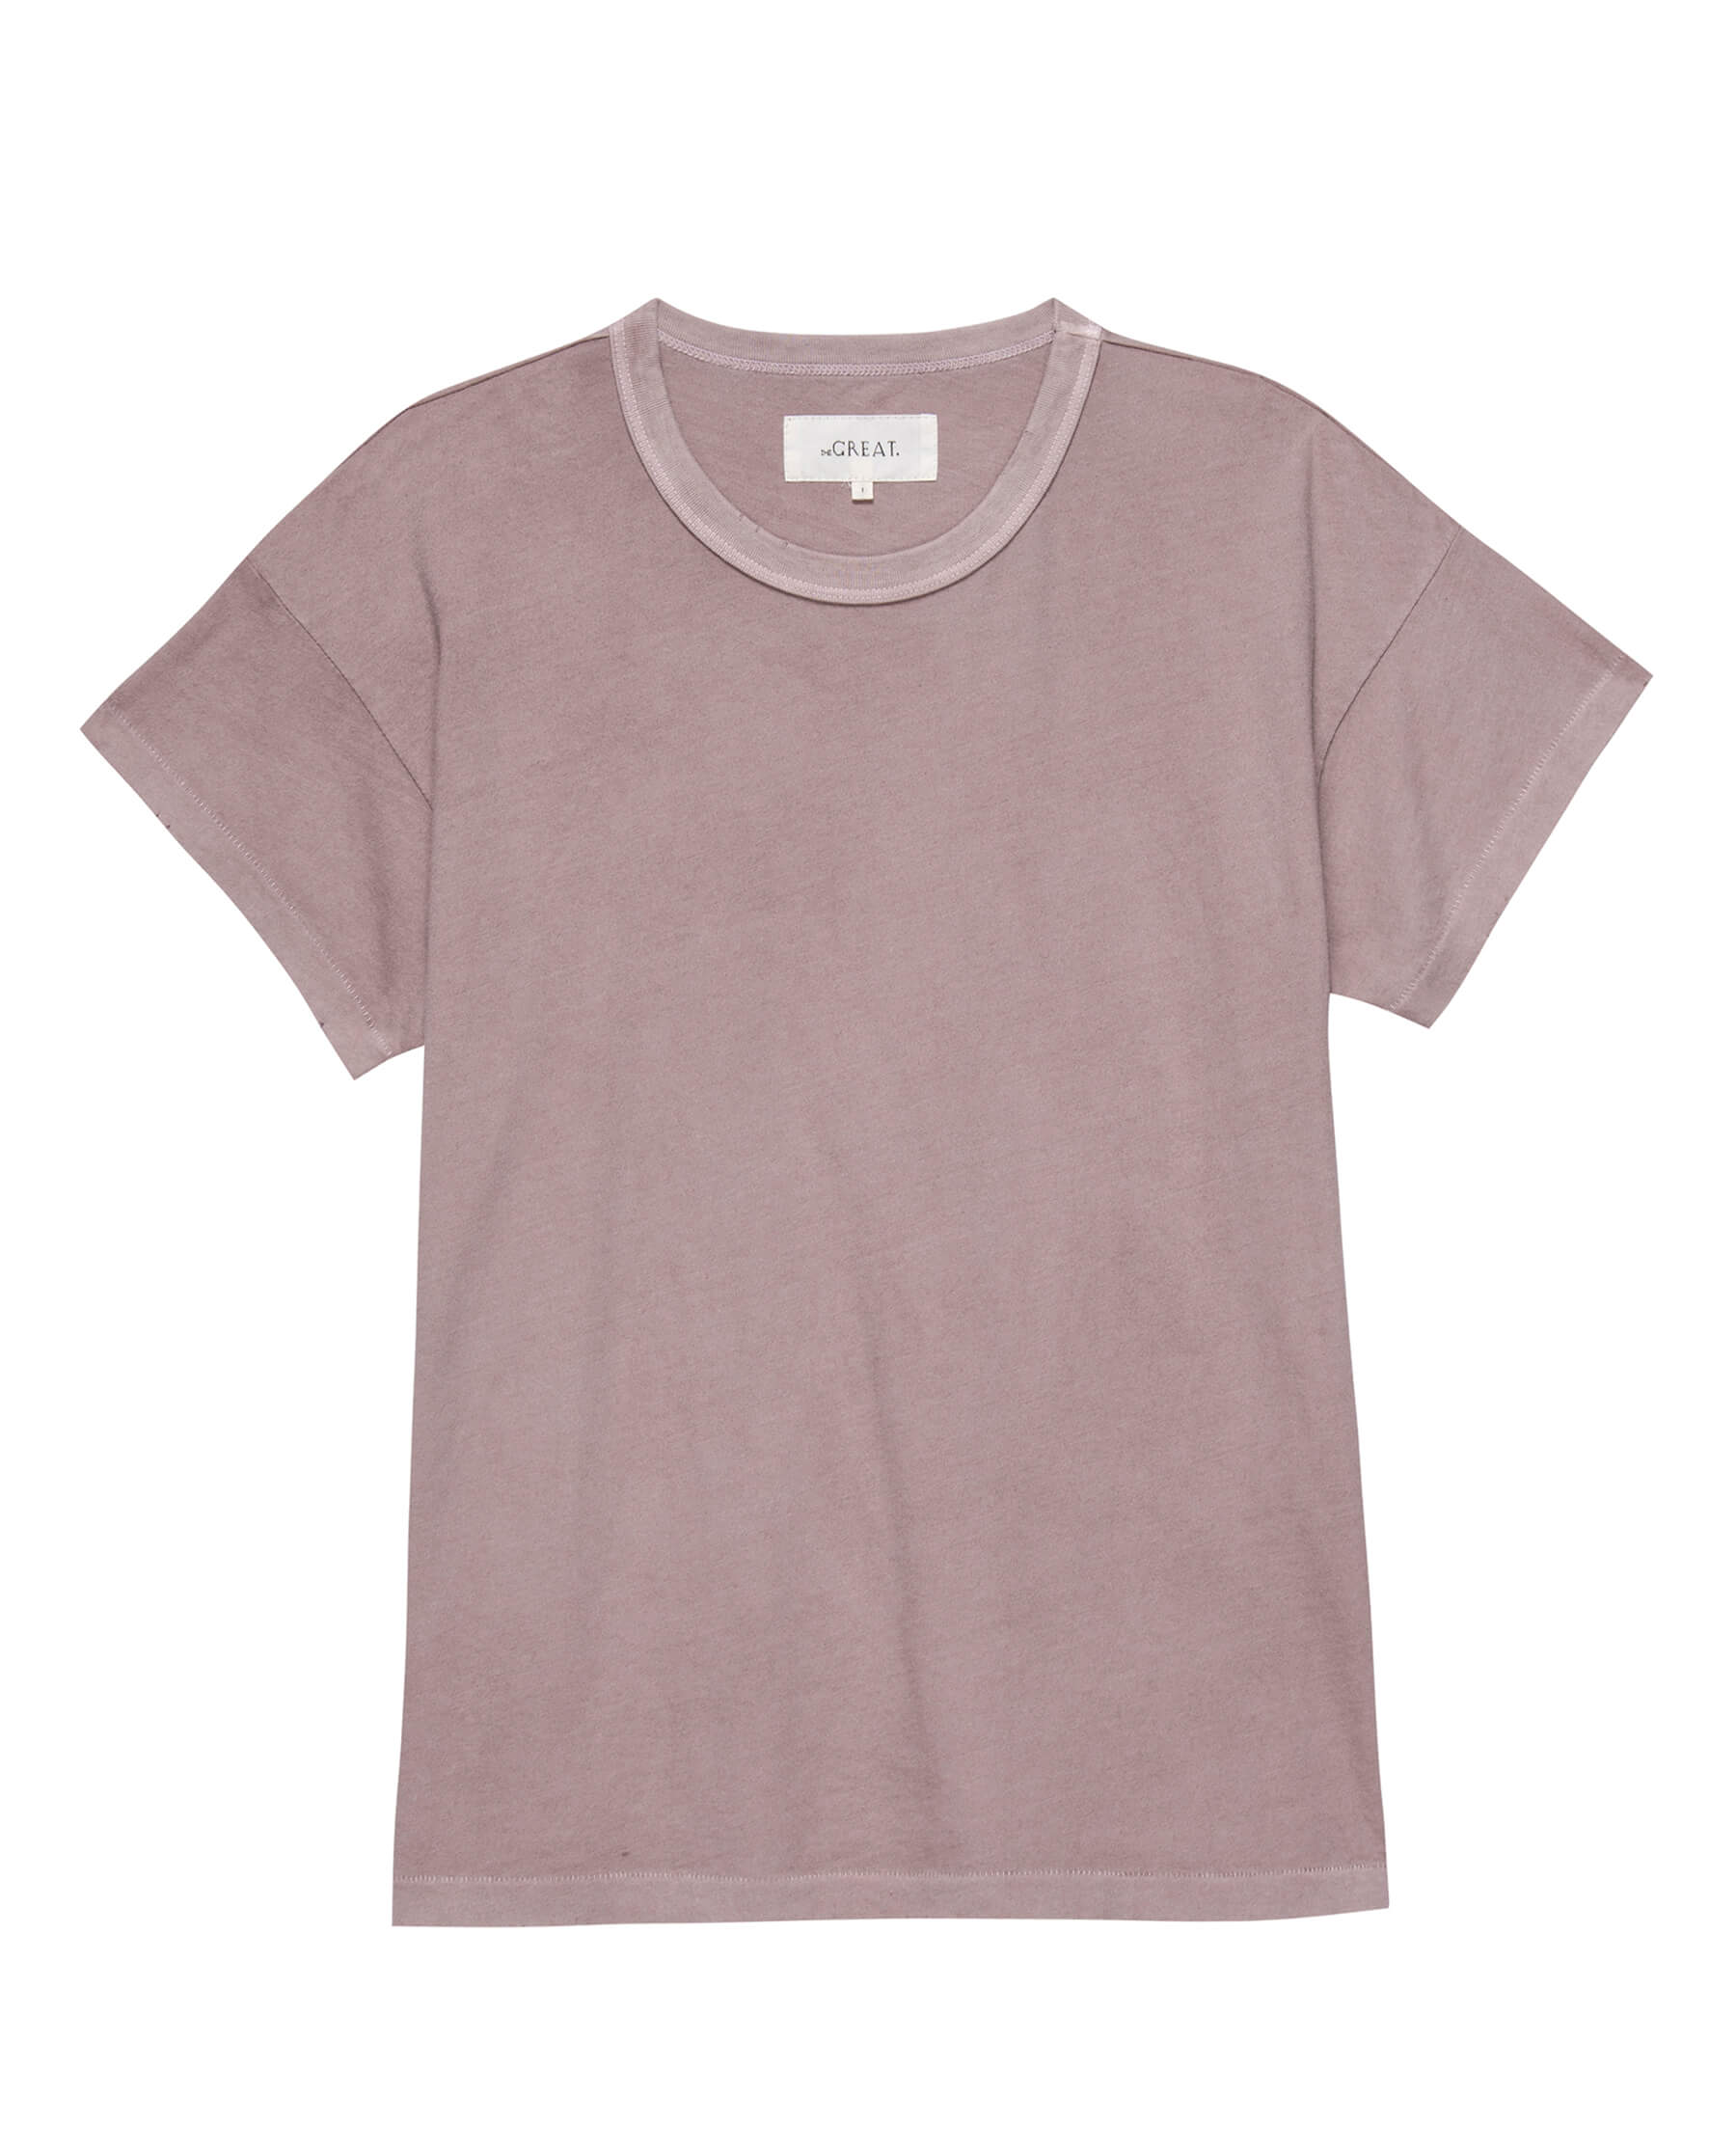 The Boxy Crew. Solid -- Soft Lilac TEES THE GREAT. SU23 KNITS